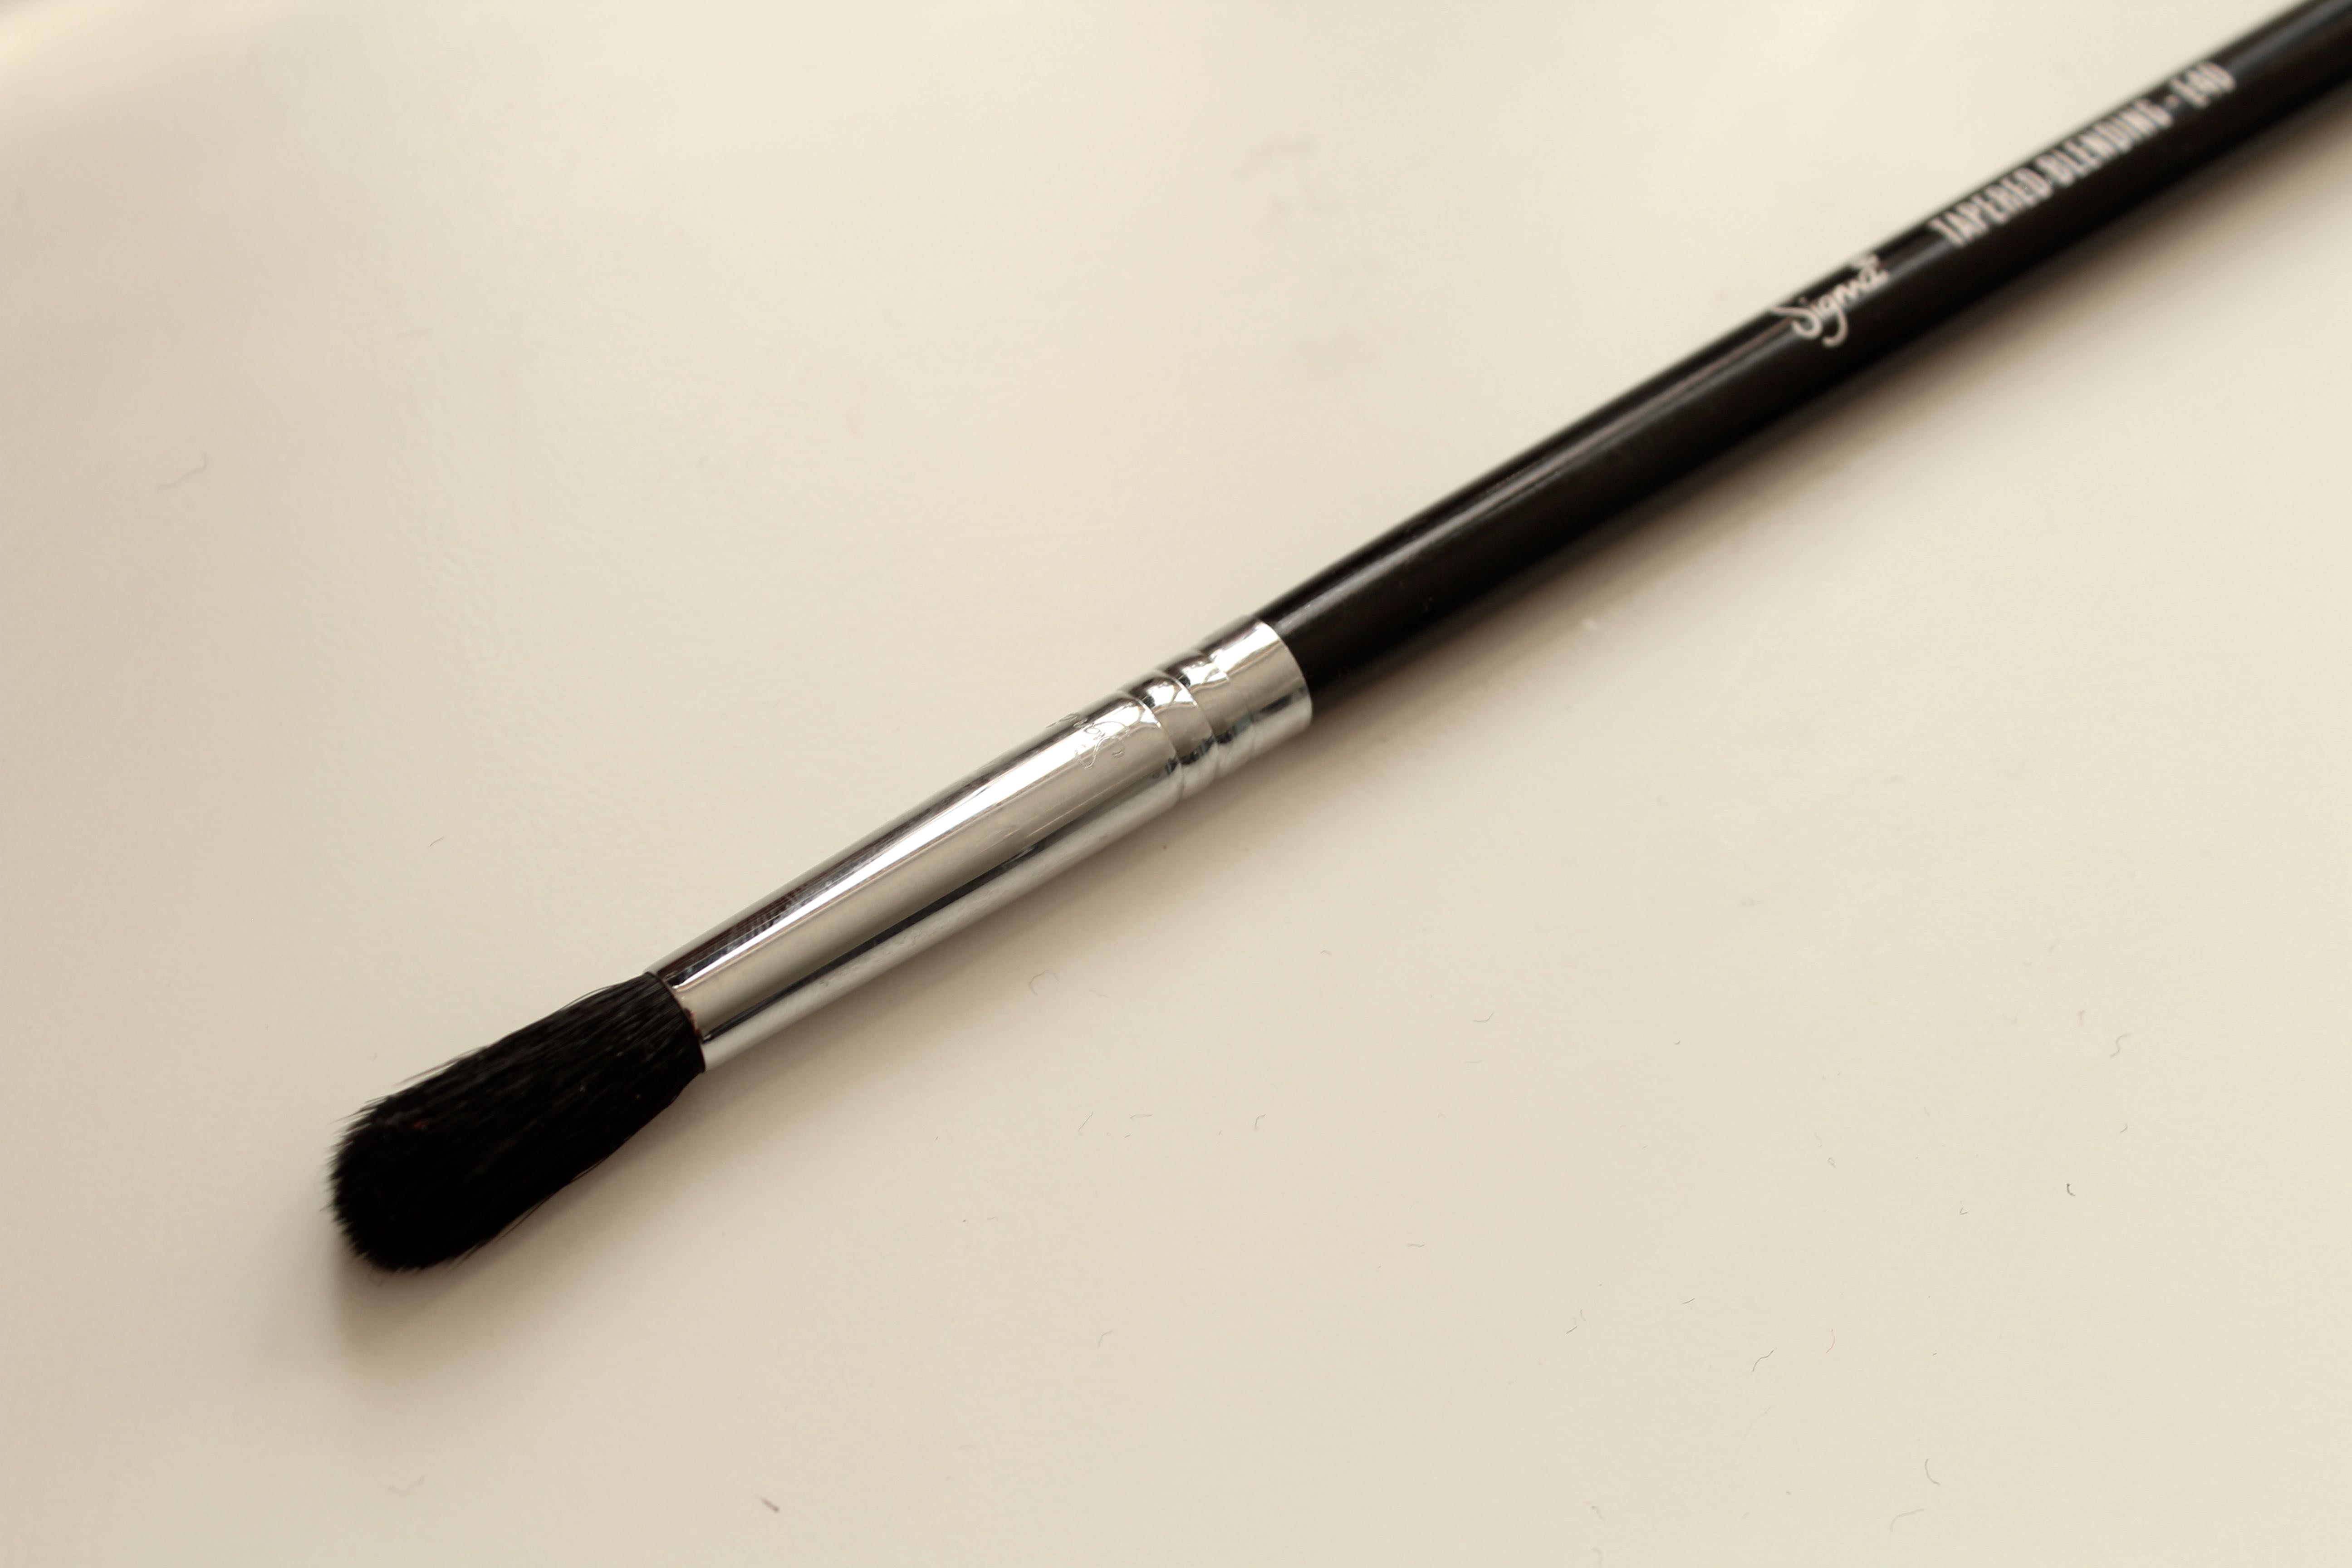 Best 7 Makeup Brushes for Smaller Eyes - Sigma E40 tapered Blending Brush by Face Made up